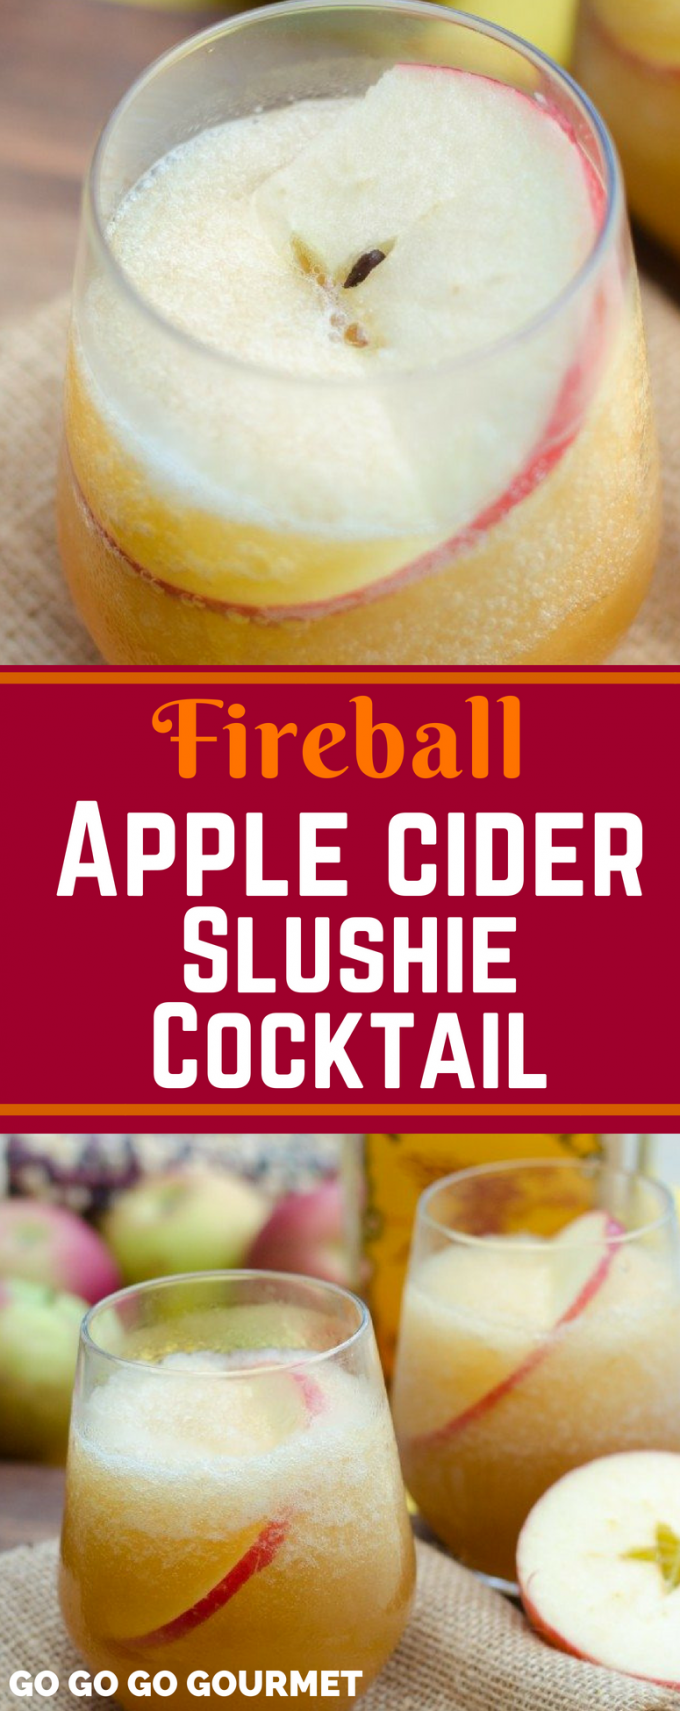 This Fireball Apple Cider Slushie Cocktail is one of the best drinks for the holidays and fall! Fire in Ice uses Fireball Whiskey, apple cider and a splash of ginger beer to make one of your new favorite fall drink recipes! #fireinice #fireballcocktails #fireballappleciderslushiecocktail #gogogogourmet via @gogogogourmet